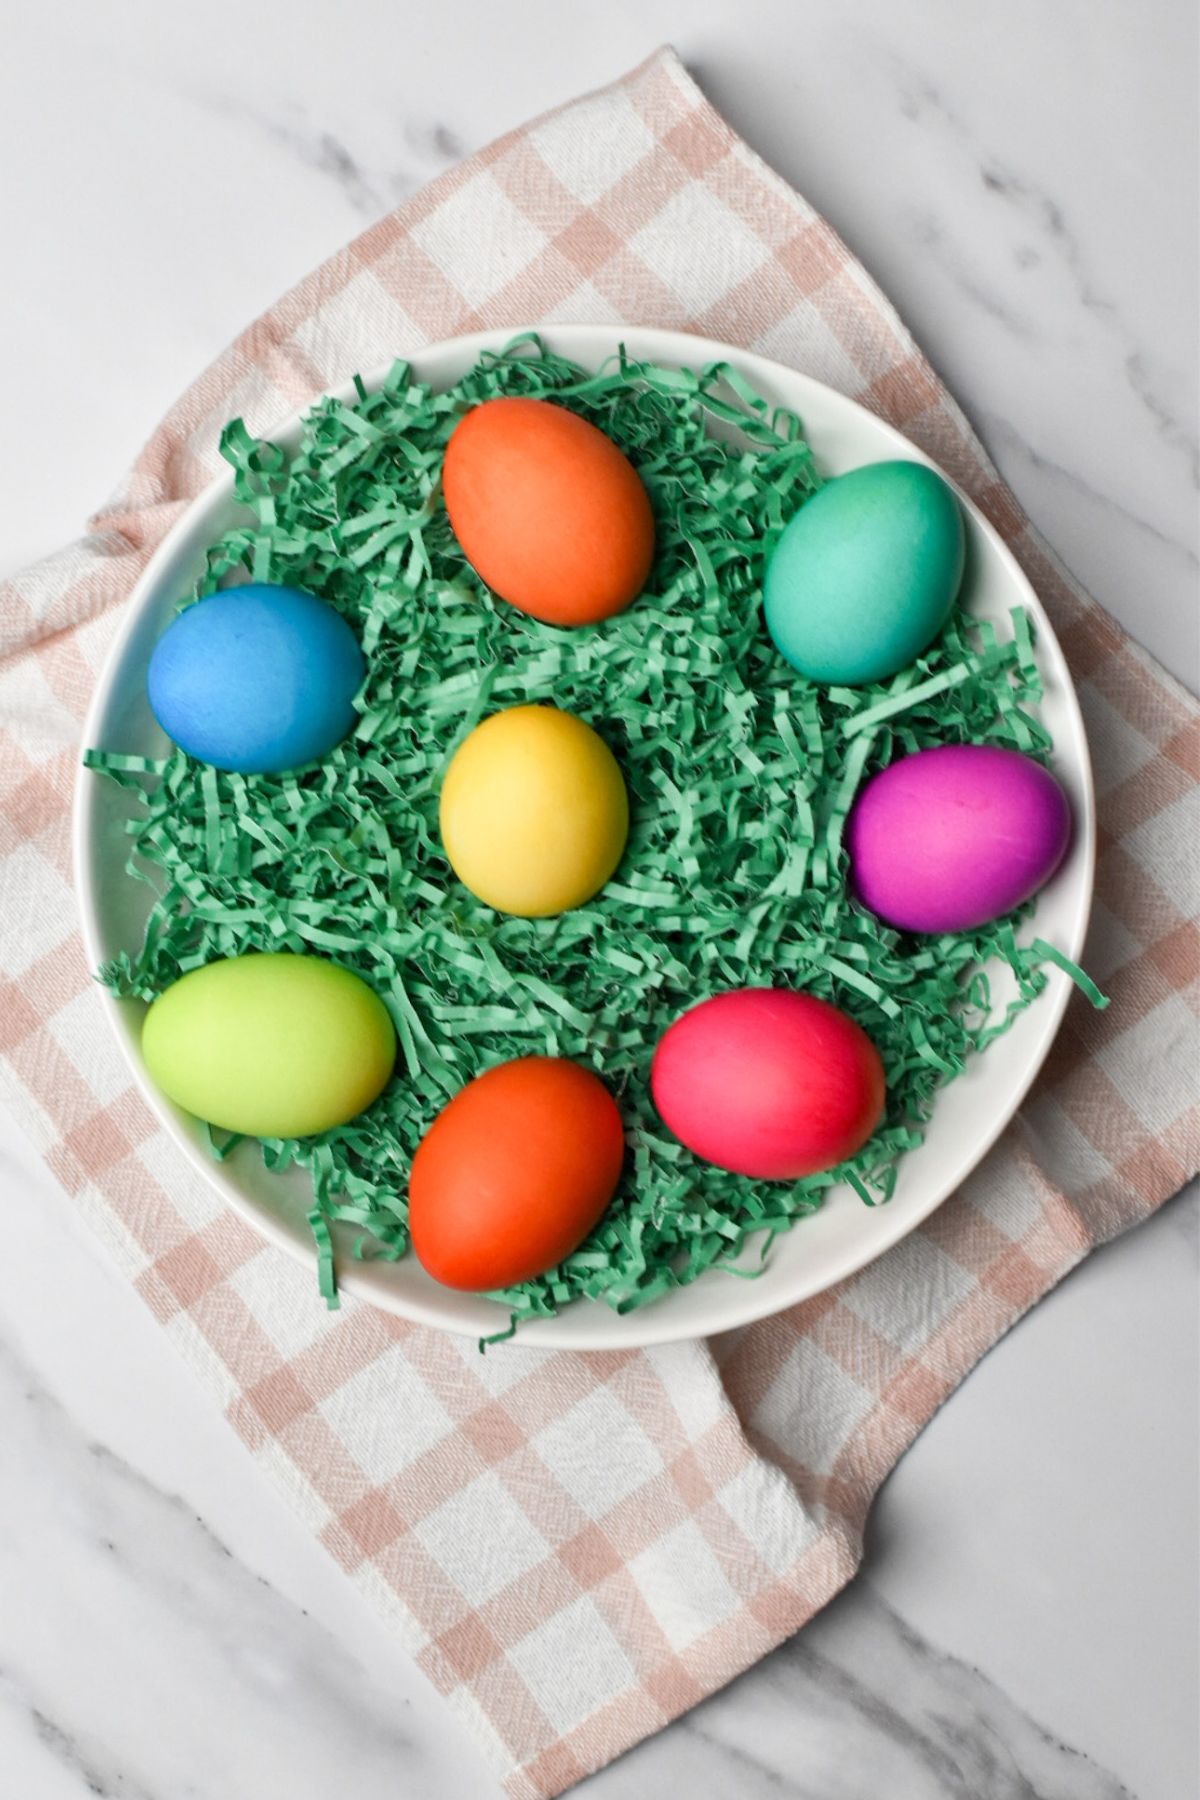 The colored eggs on green Easter grass in a white bowl with a white and pink kitchen towel under it.